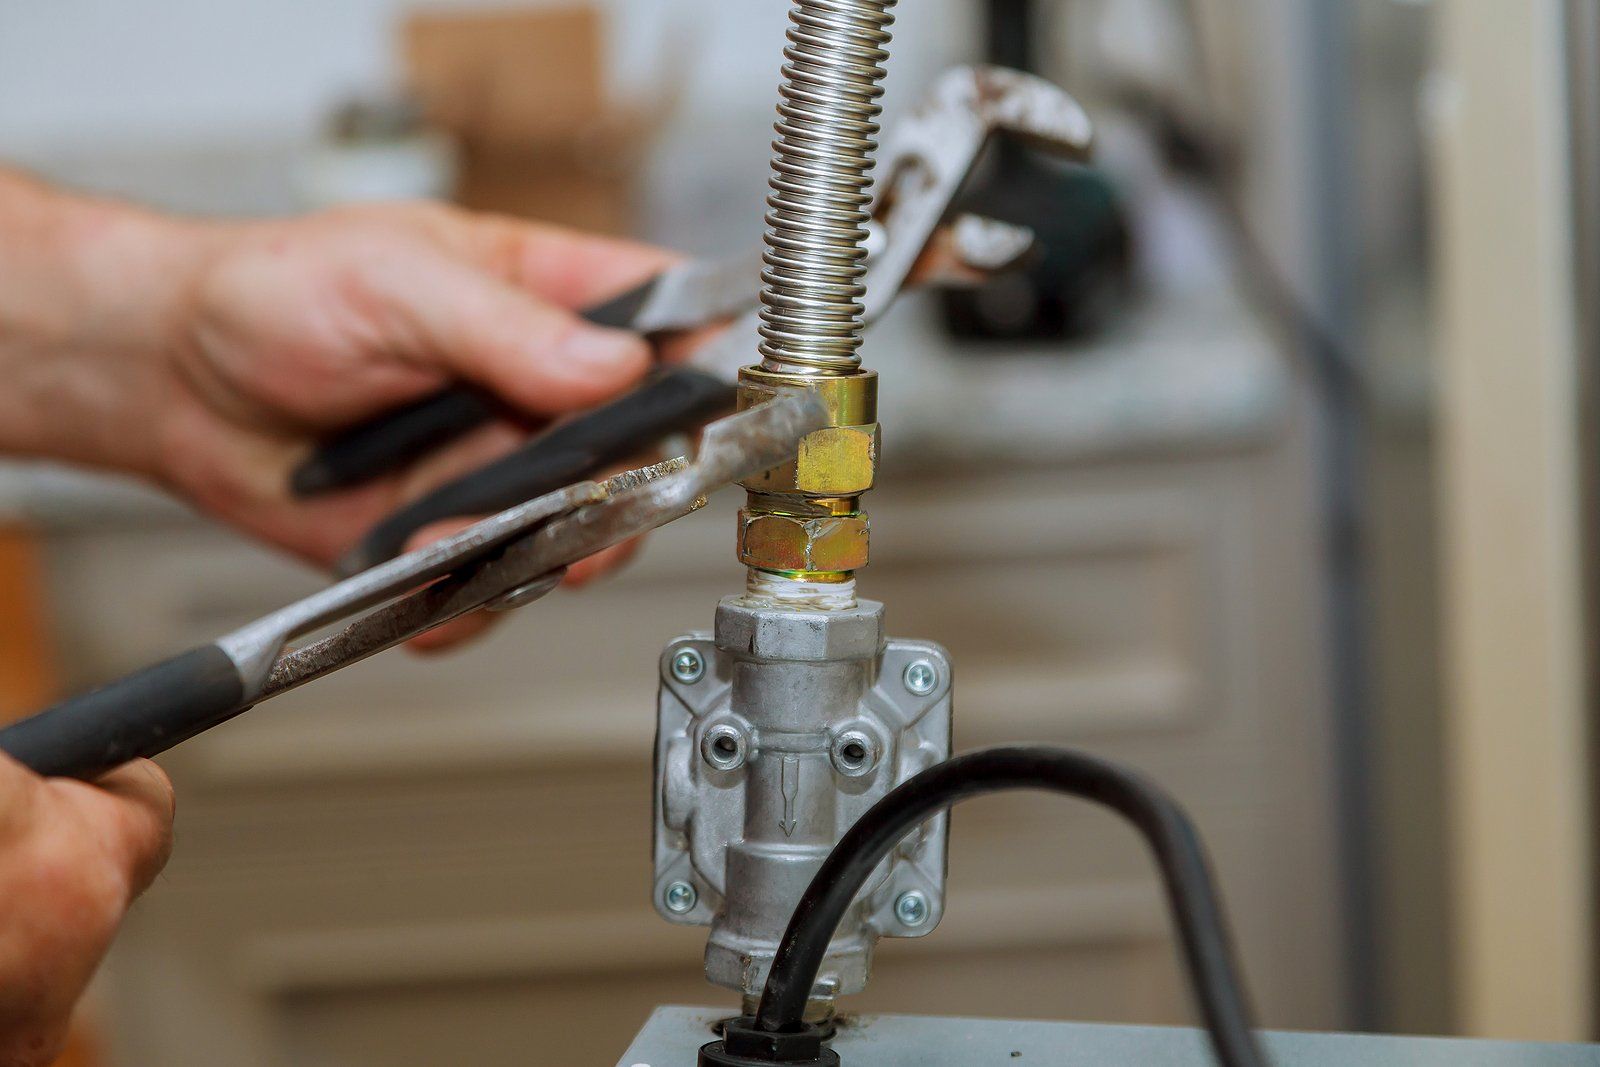 Plumbing Services in Huber Heights, OH